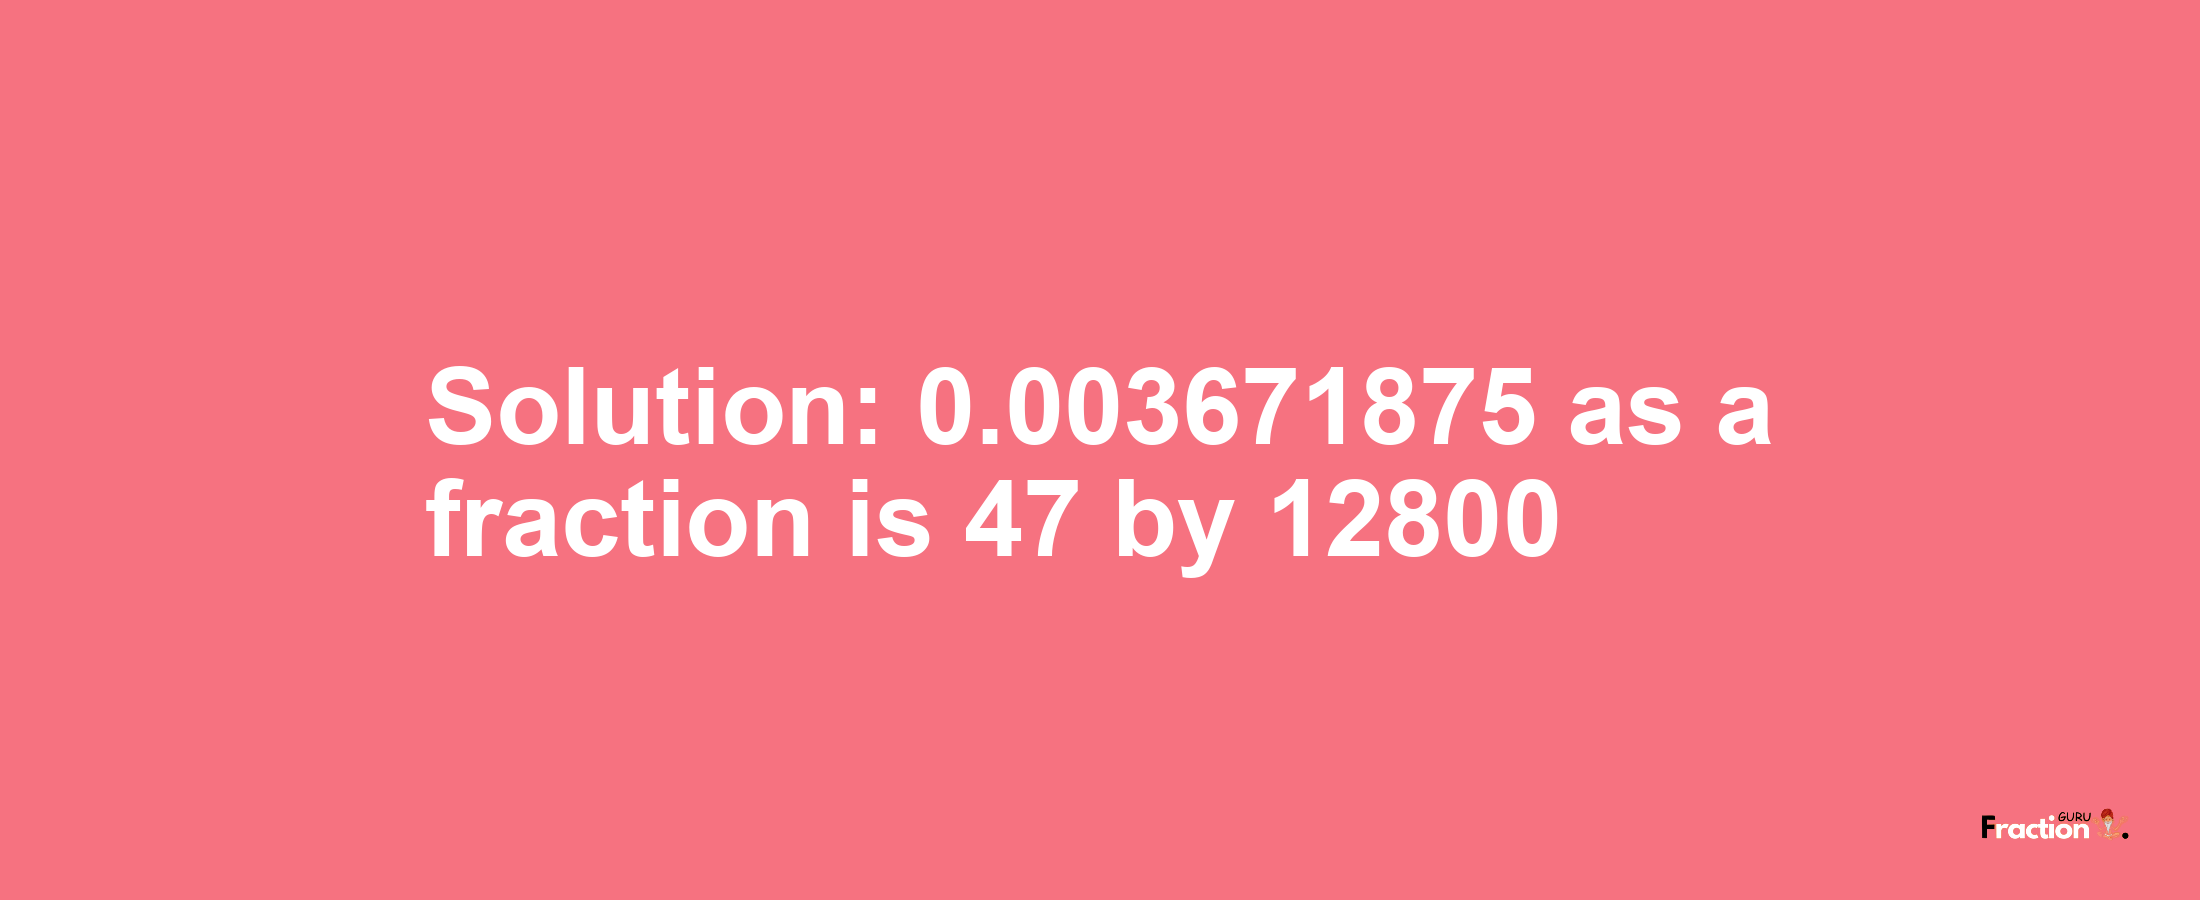 Solution:0.003671875 as a fraction is 47/12800